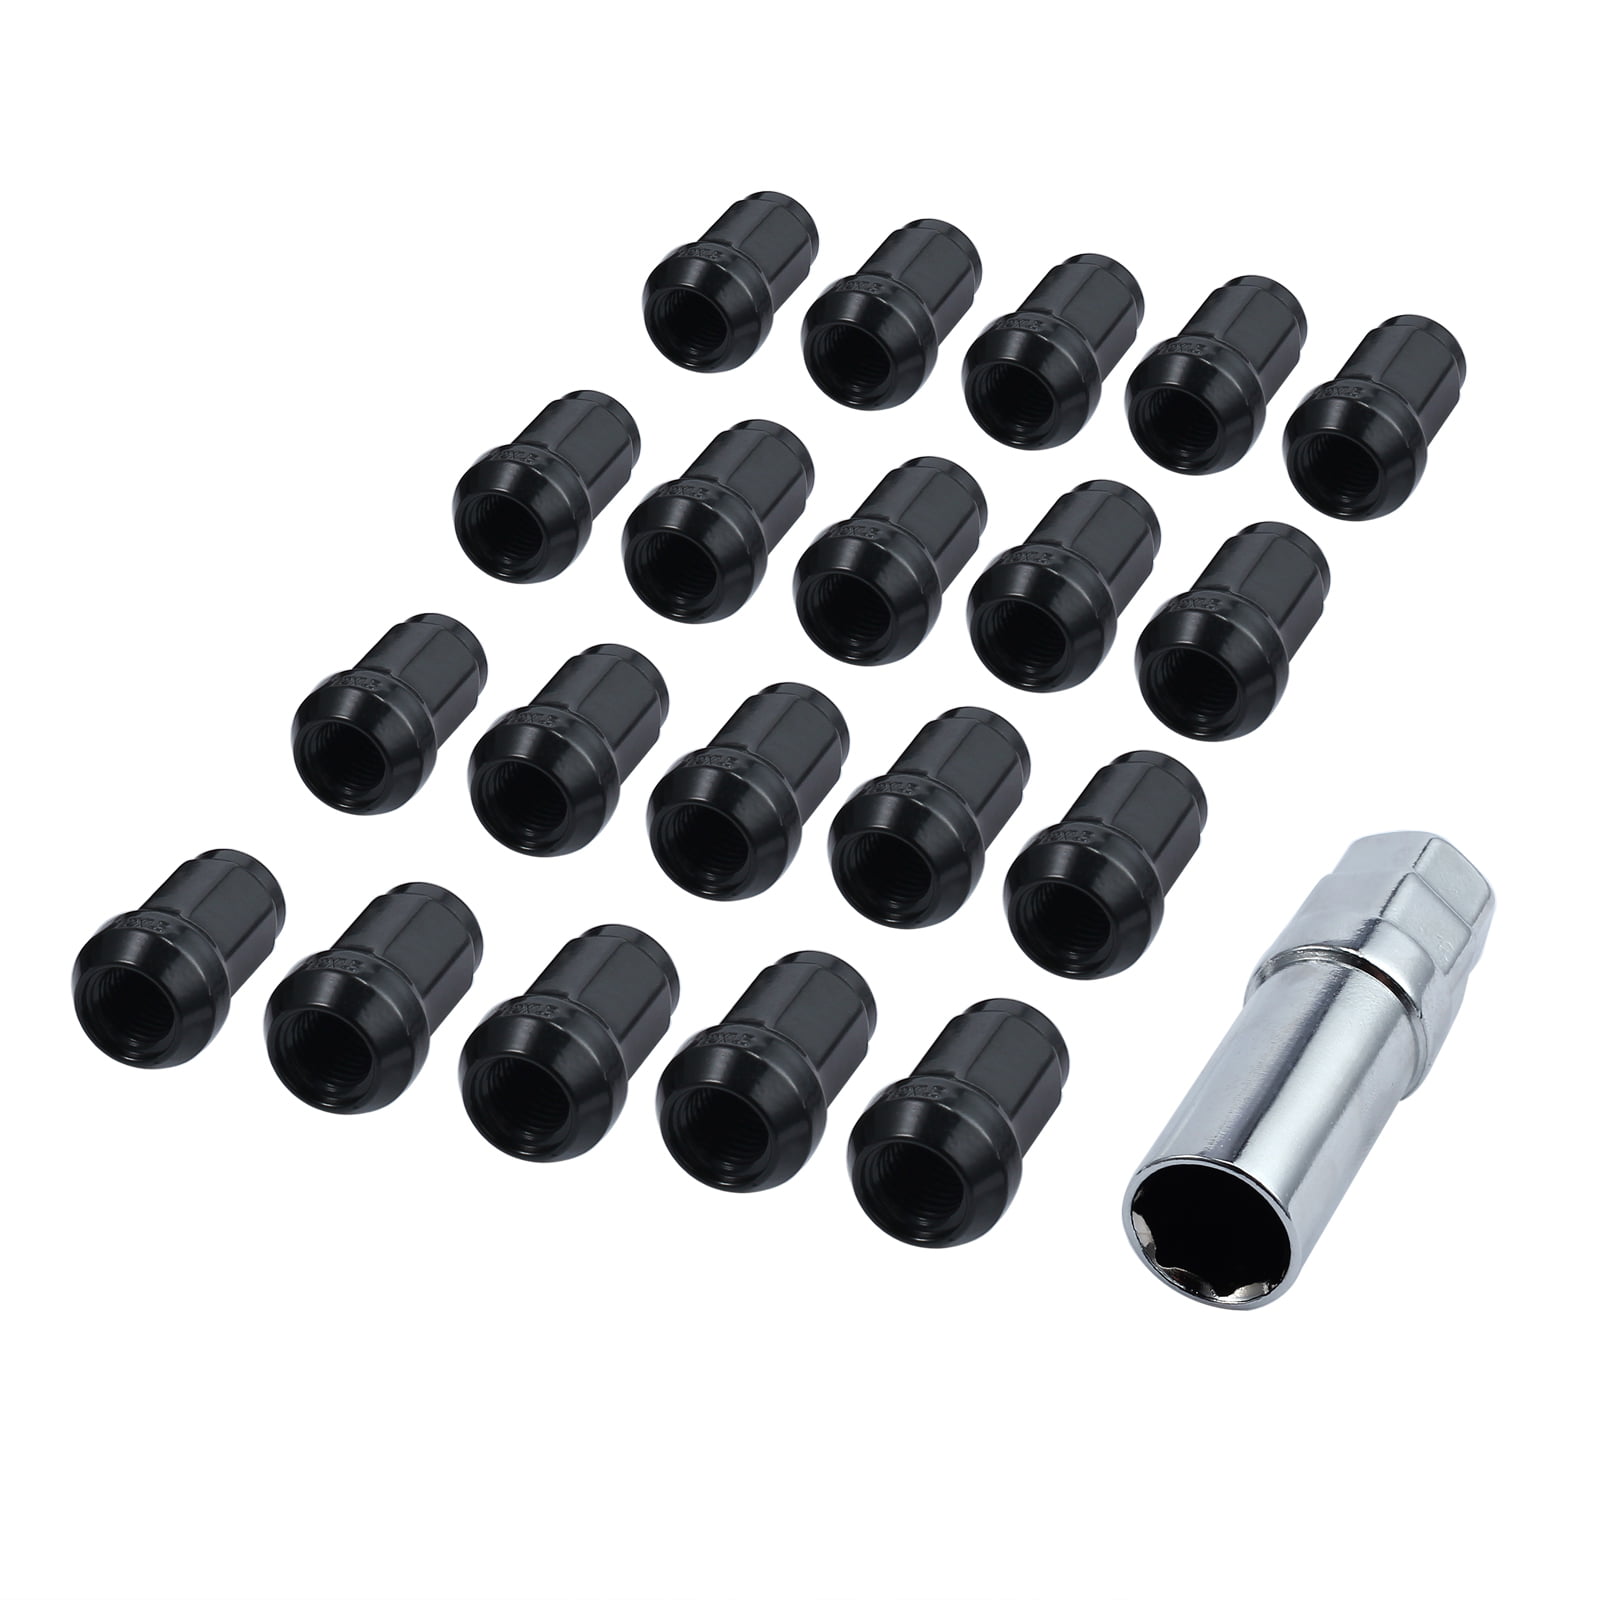 OEM Genuine Alloys 20 x Black Solid Ford Wheel Nuts fits Ford Mondeo to 11 